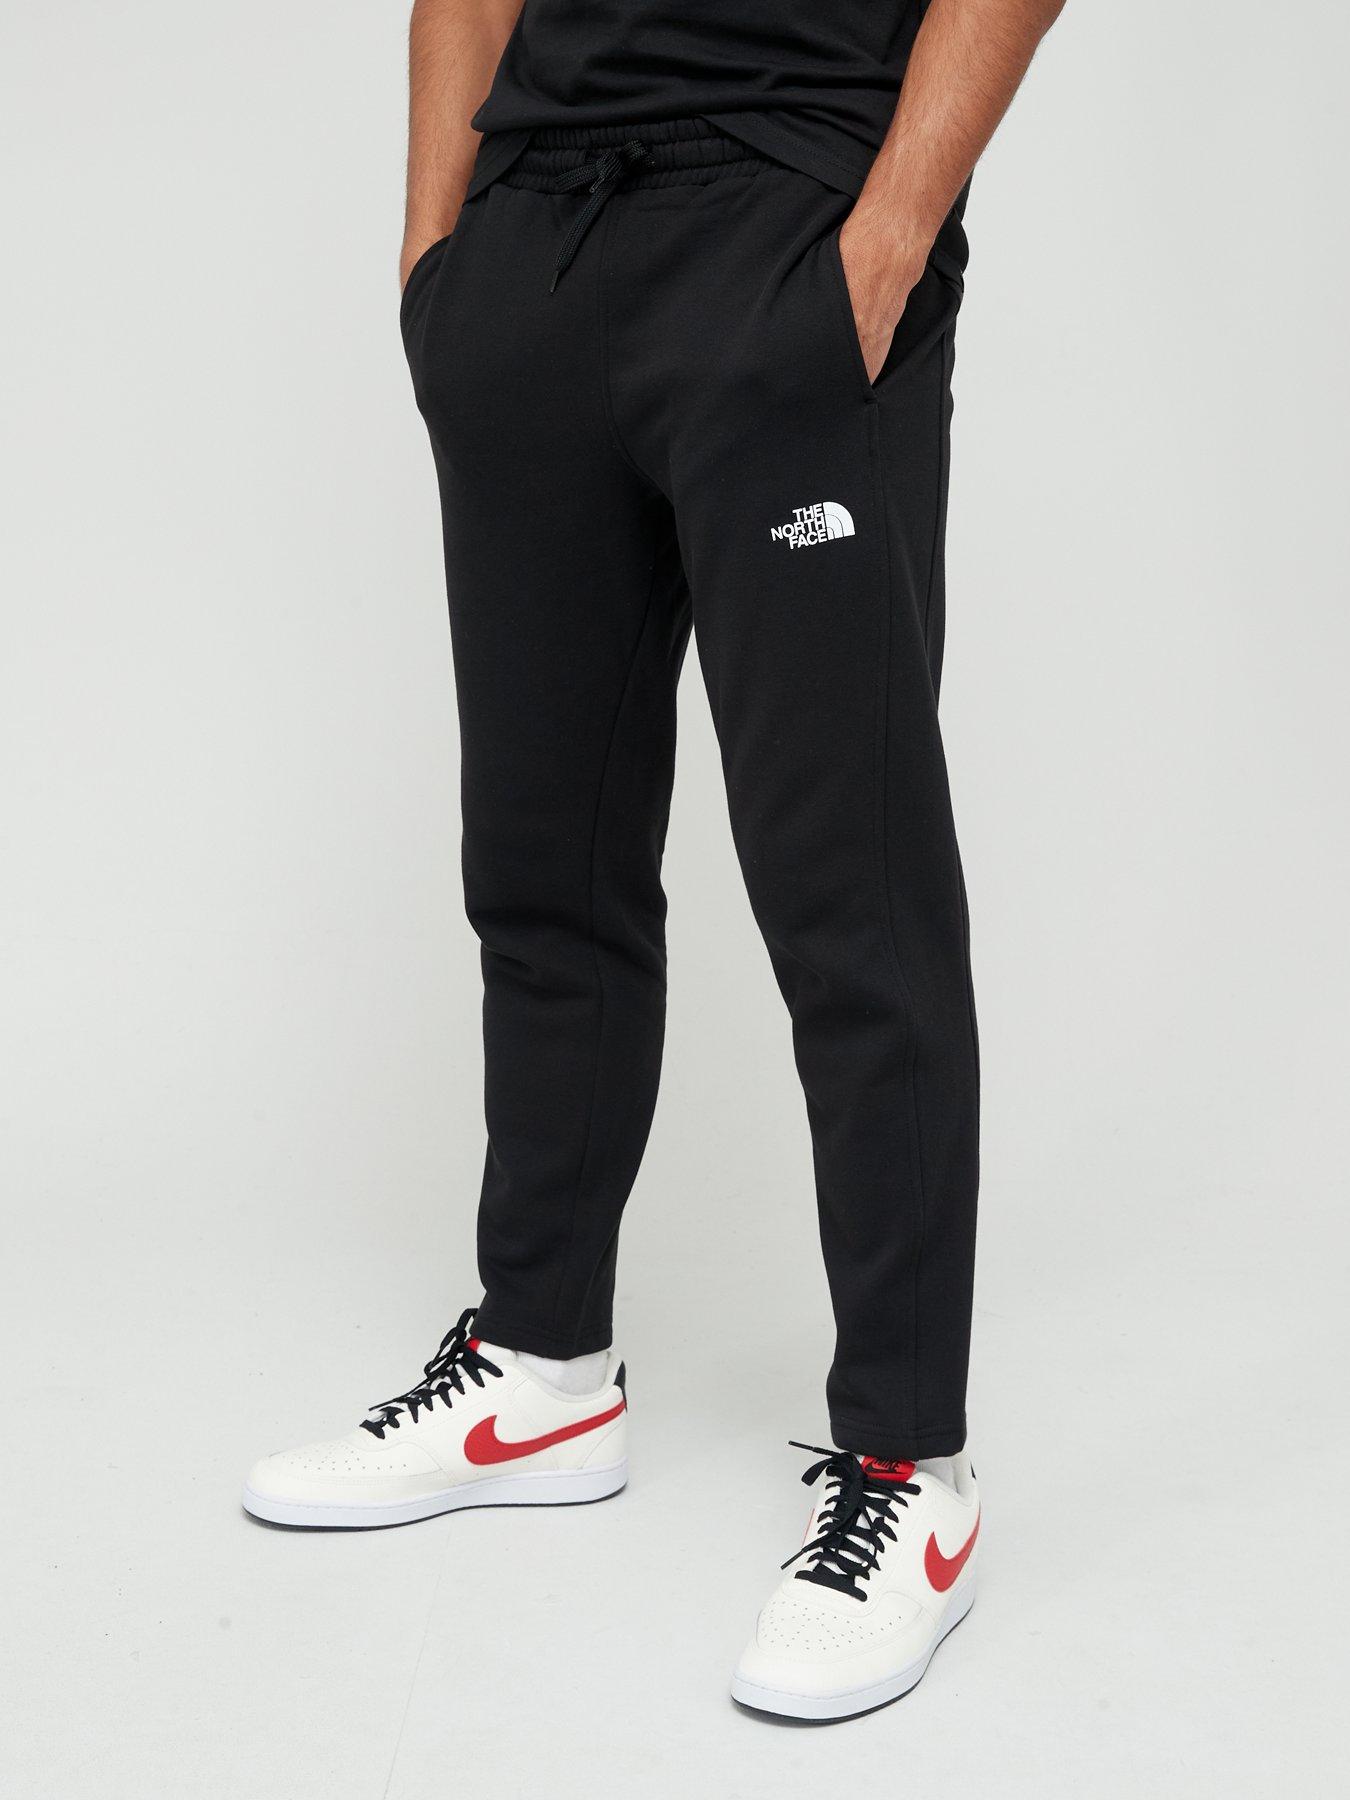 north face tracksuit bottoms mens